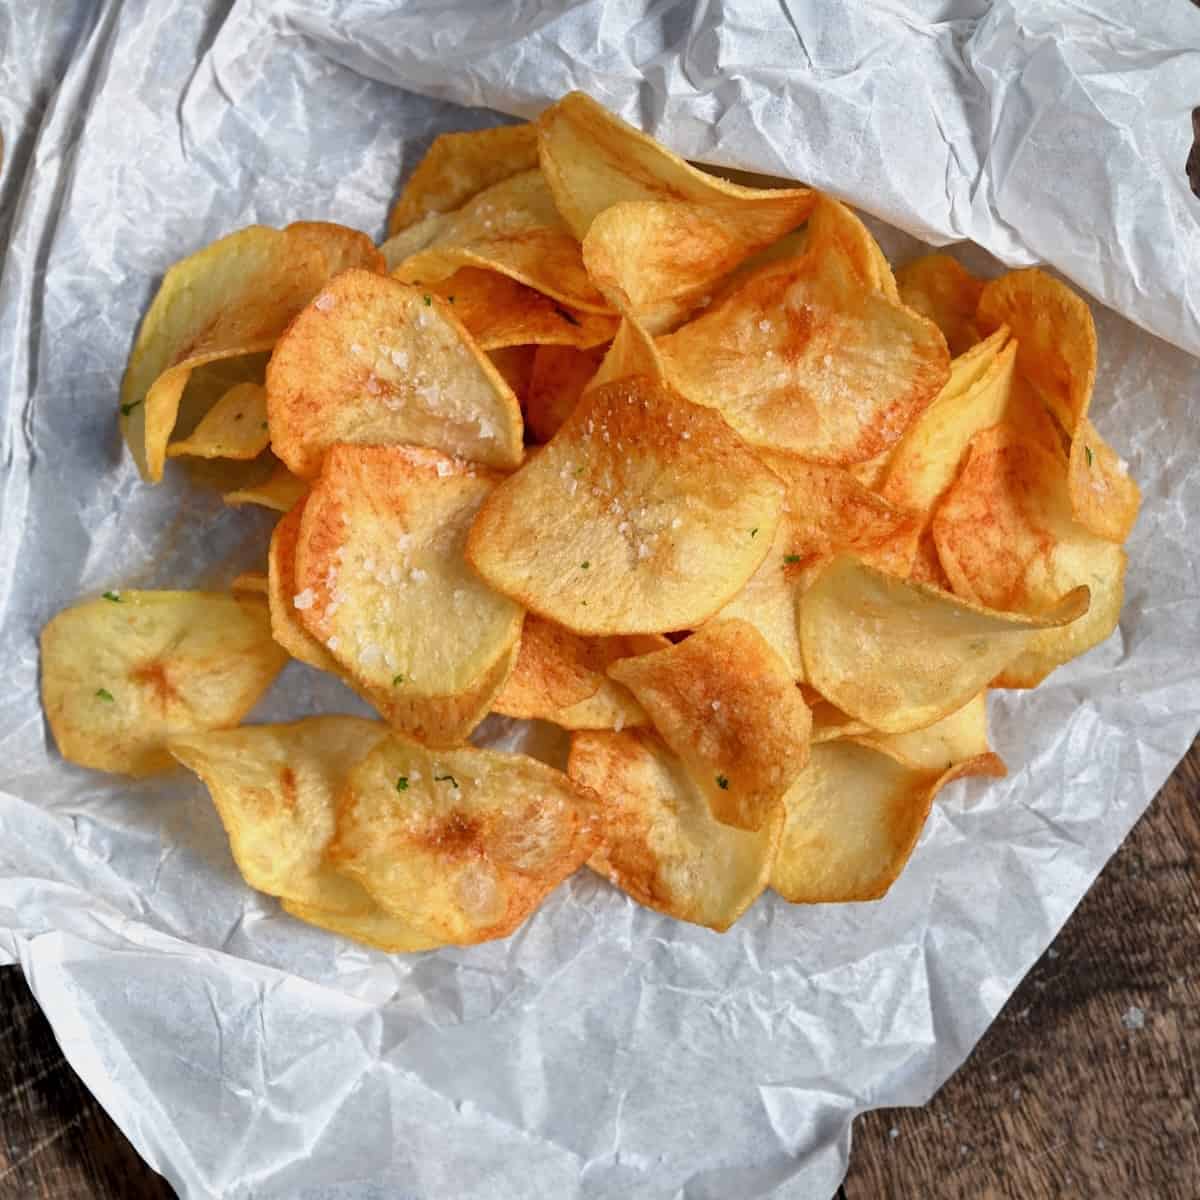 images of potato chips